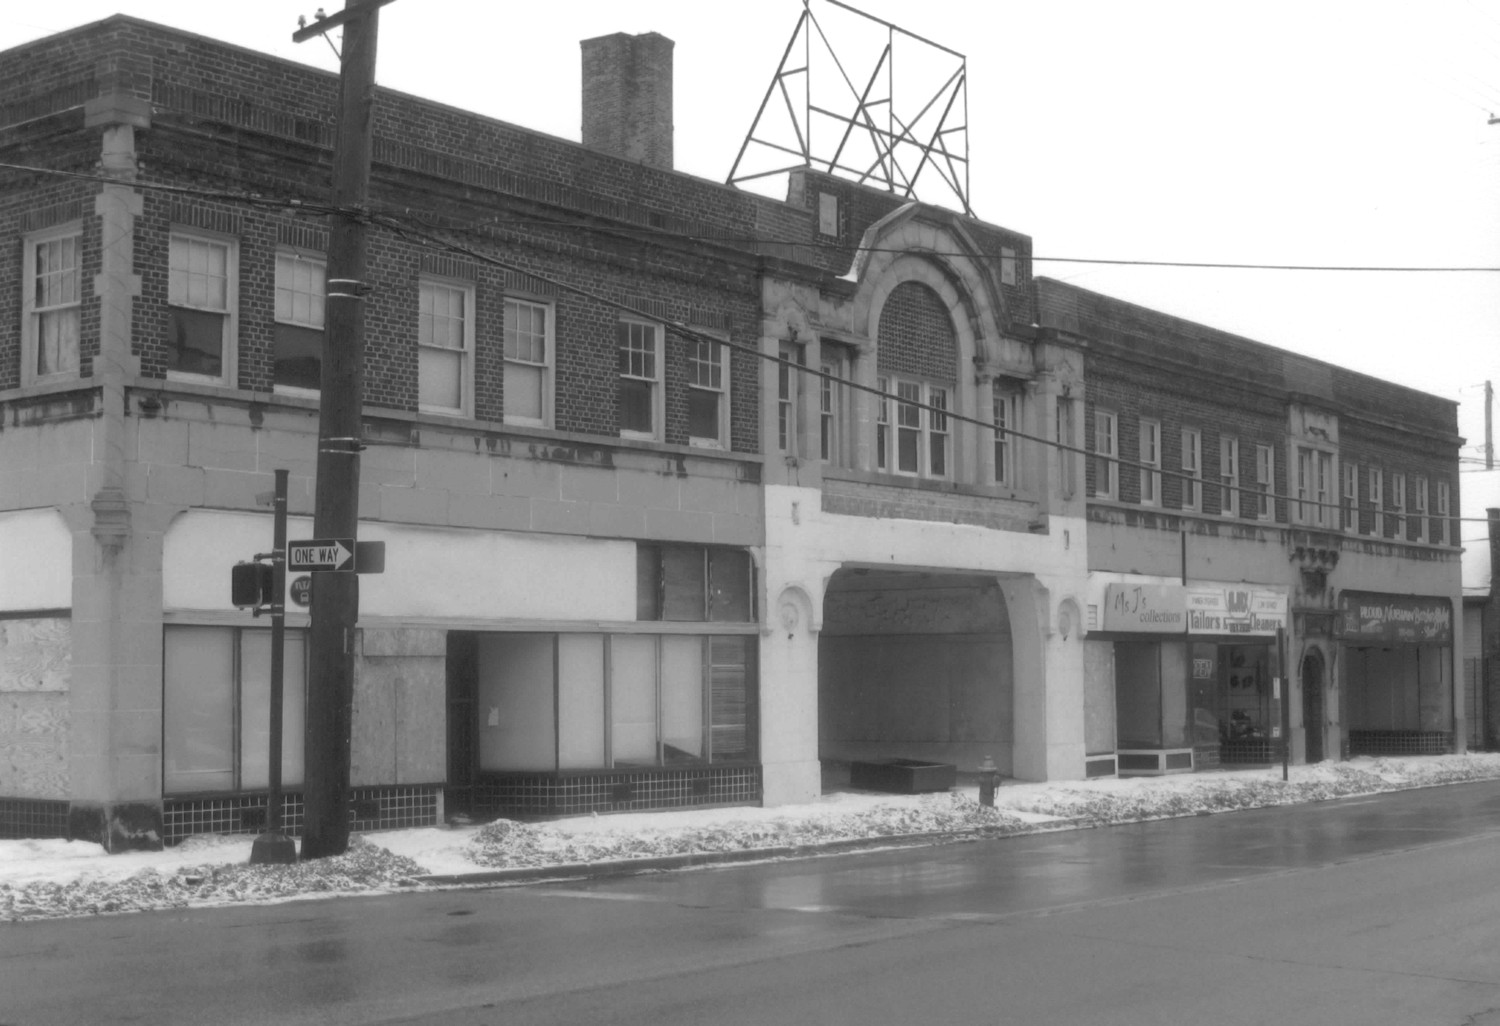 Moreland Theater Building, Cleveland Ohio Front (north) elevation, looking southwest (2011)